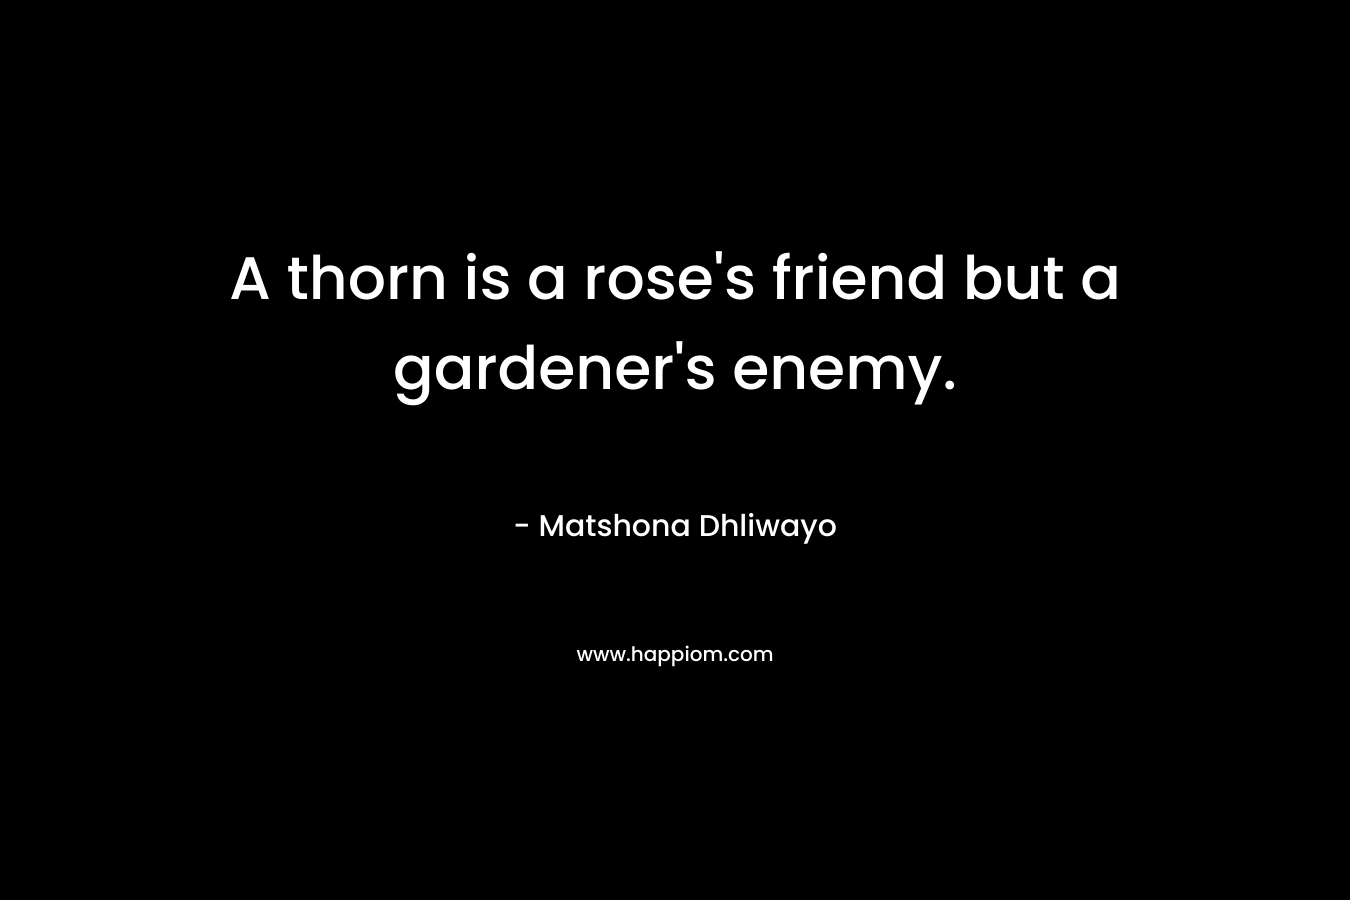 A thorn is a rose's friend but a gardener's enemy.